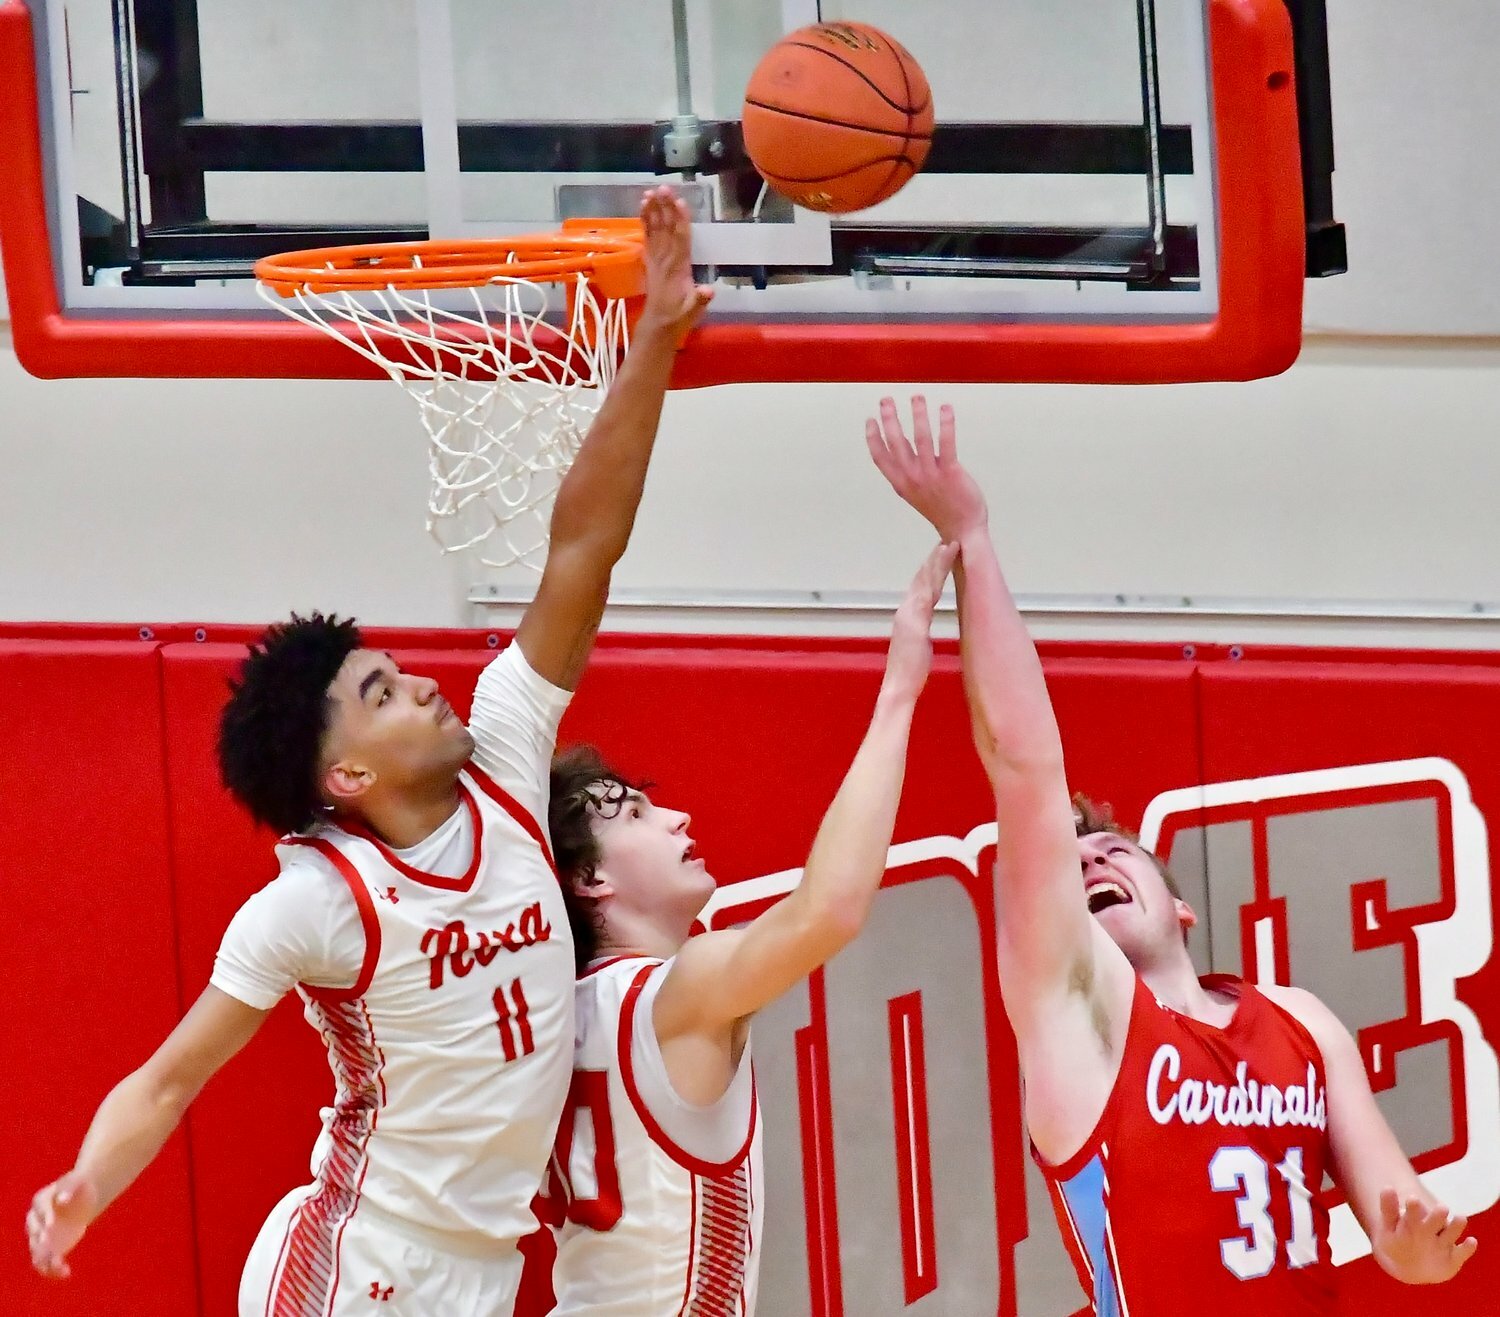 KAEL COMBS led Nixa to an undefeated COC run in basketball.